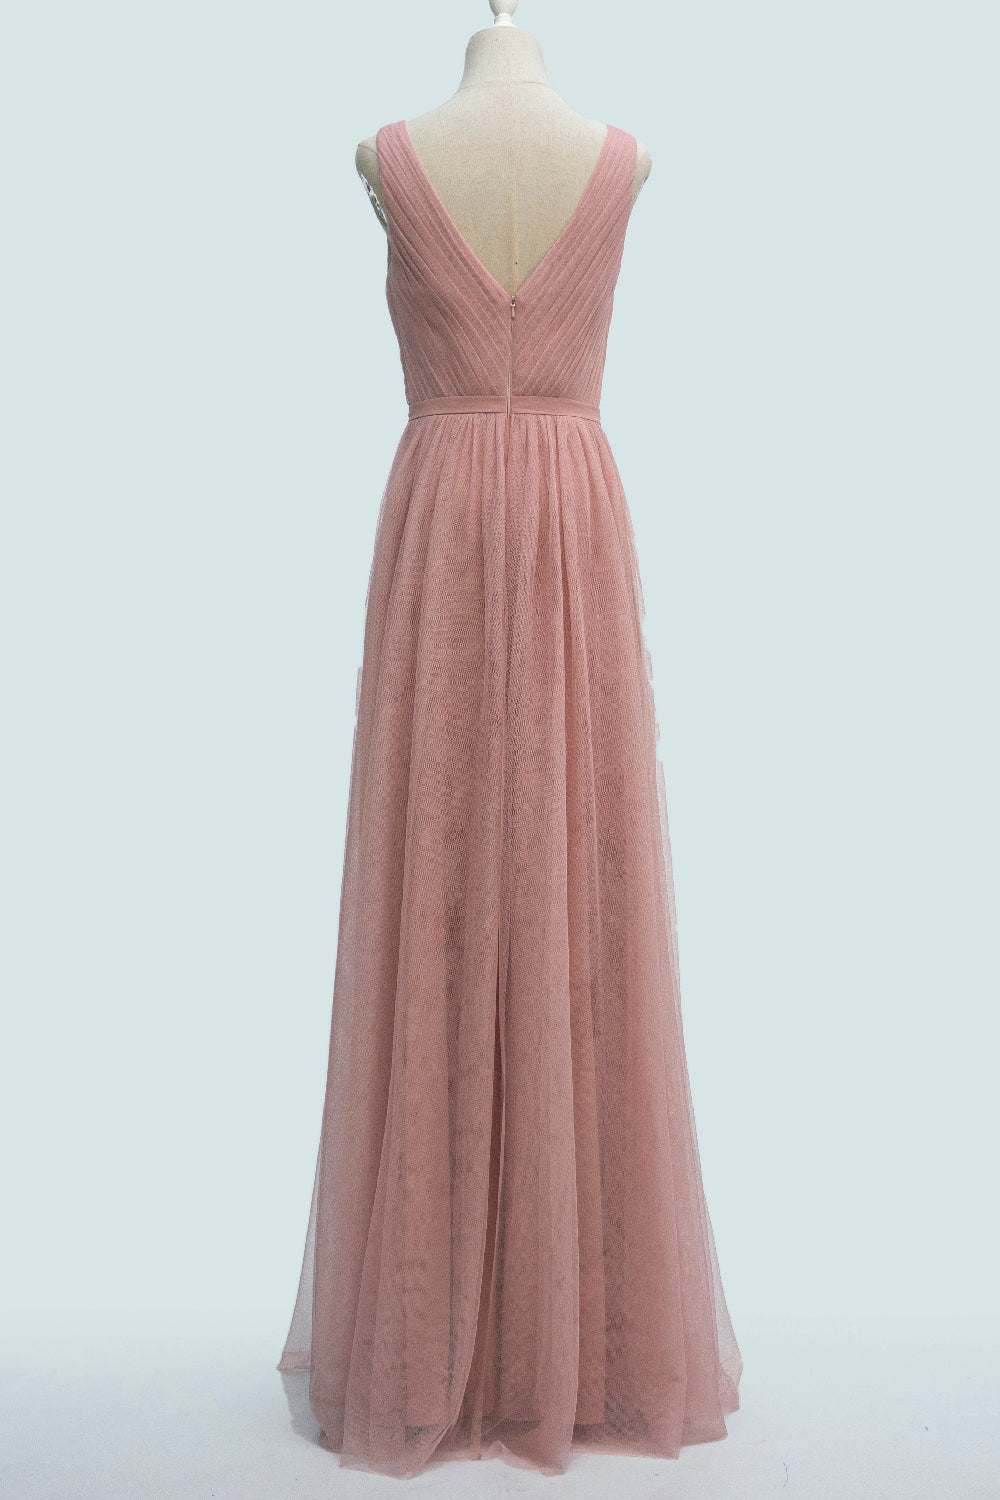 Blushing Pink A-line V-Neckline Pleated Long Bridesmaid Dress